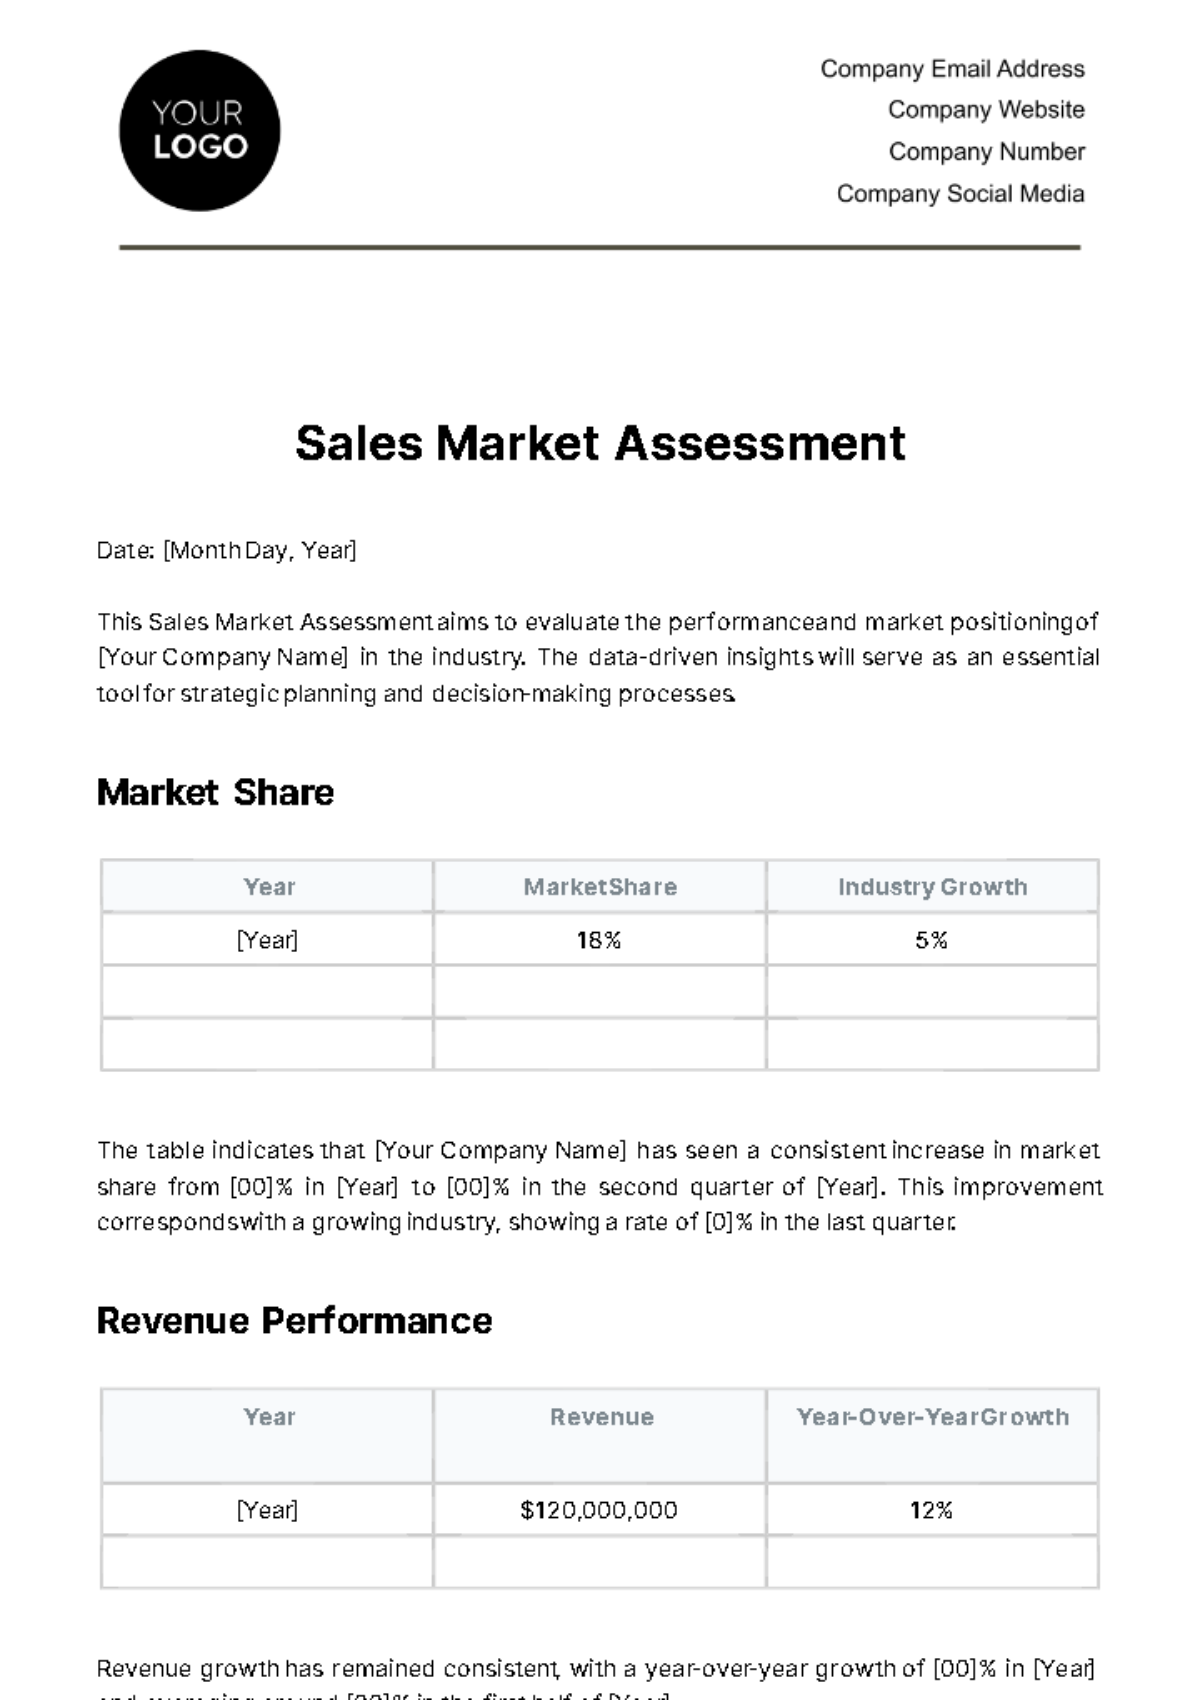 Free Sales Market Assessment Template